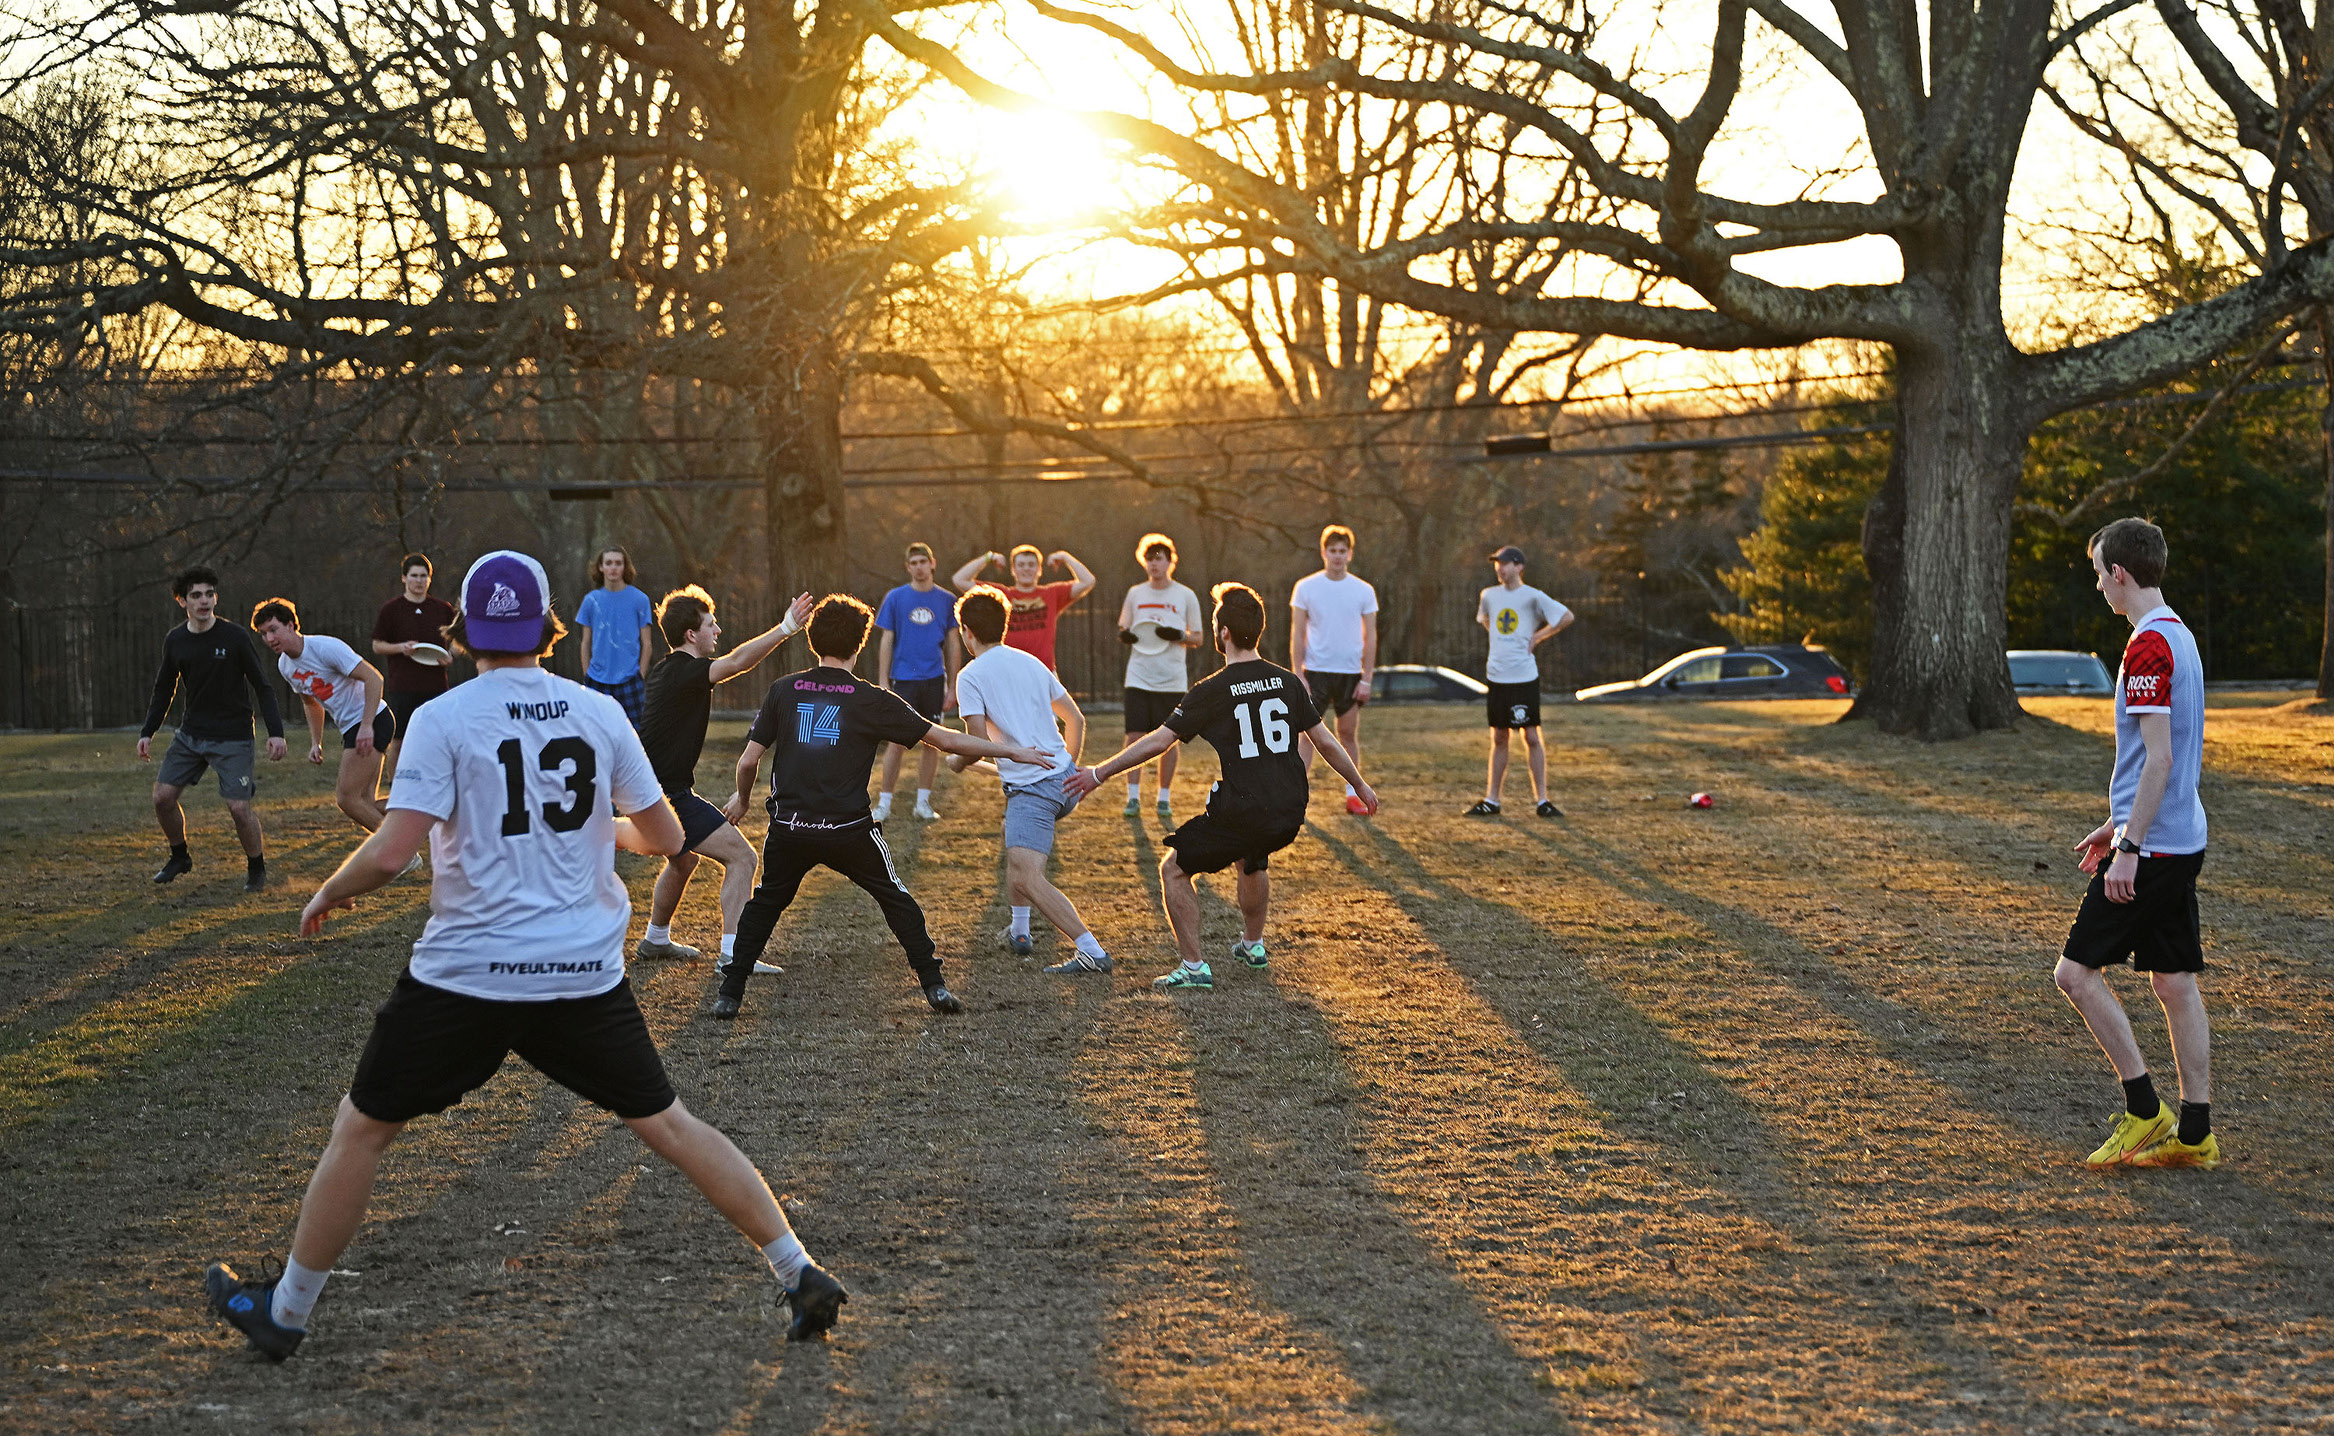 Students play ultimate frisbee on Harkness Green before sunset